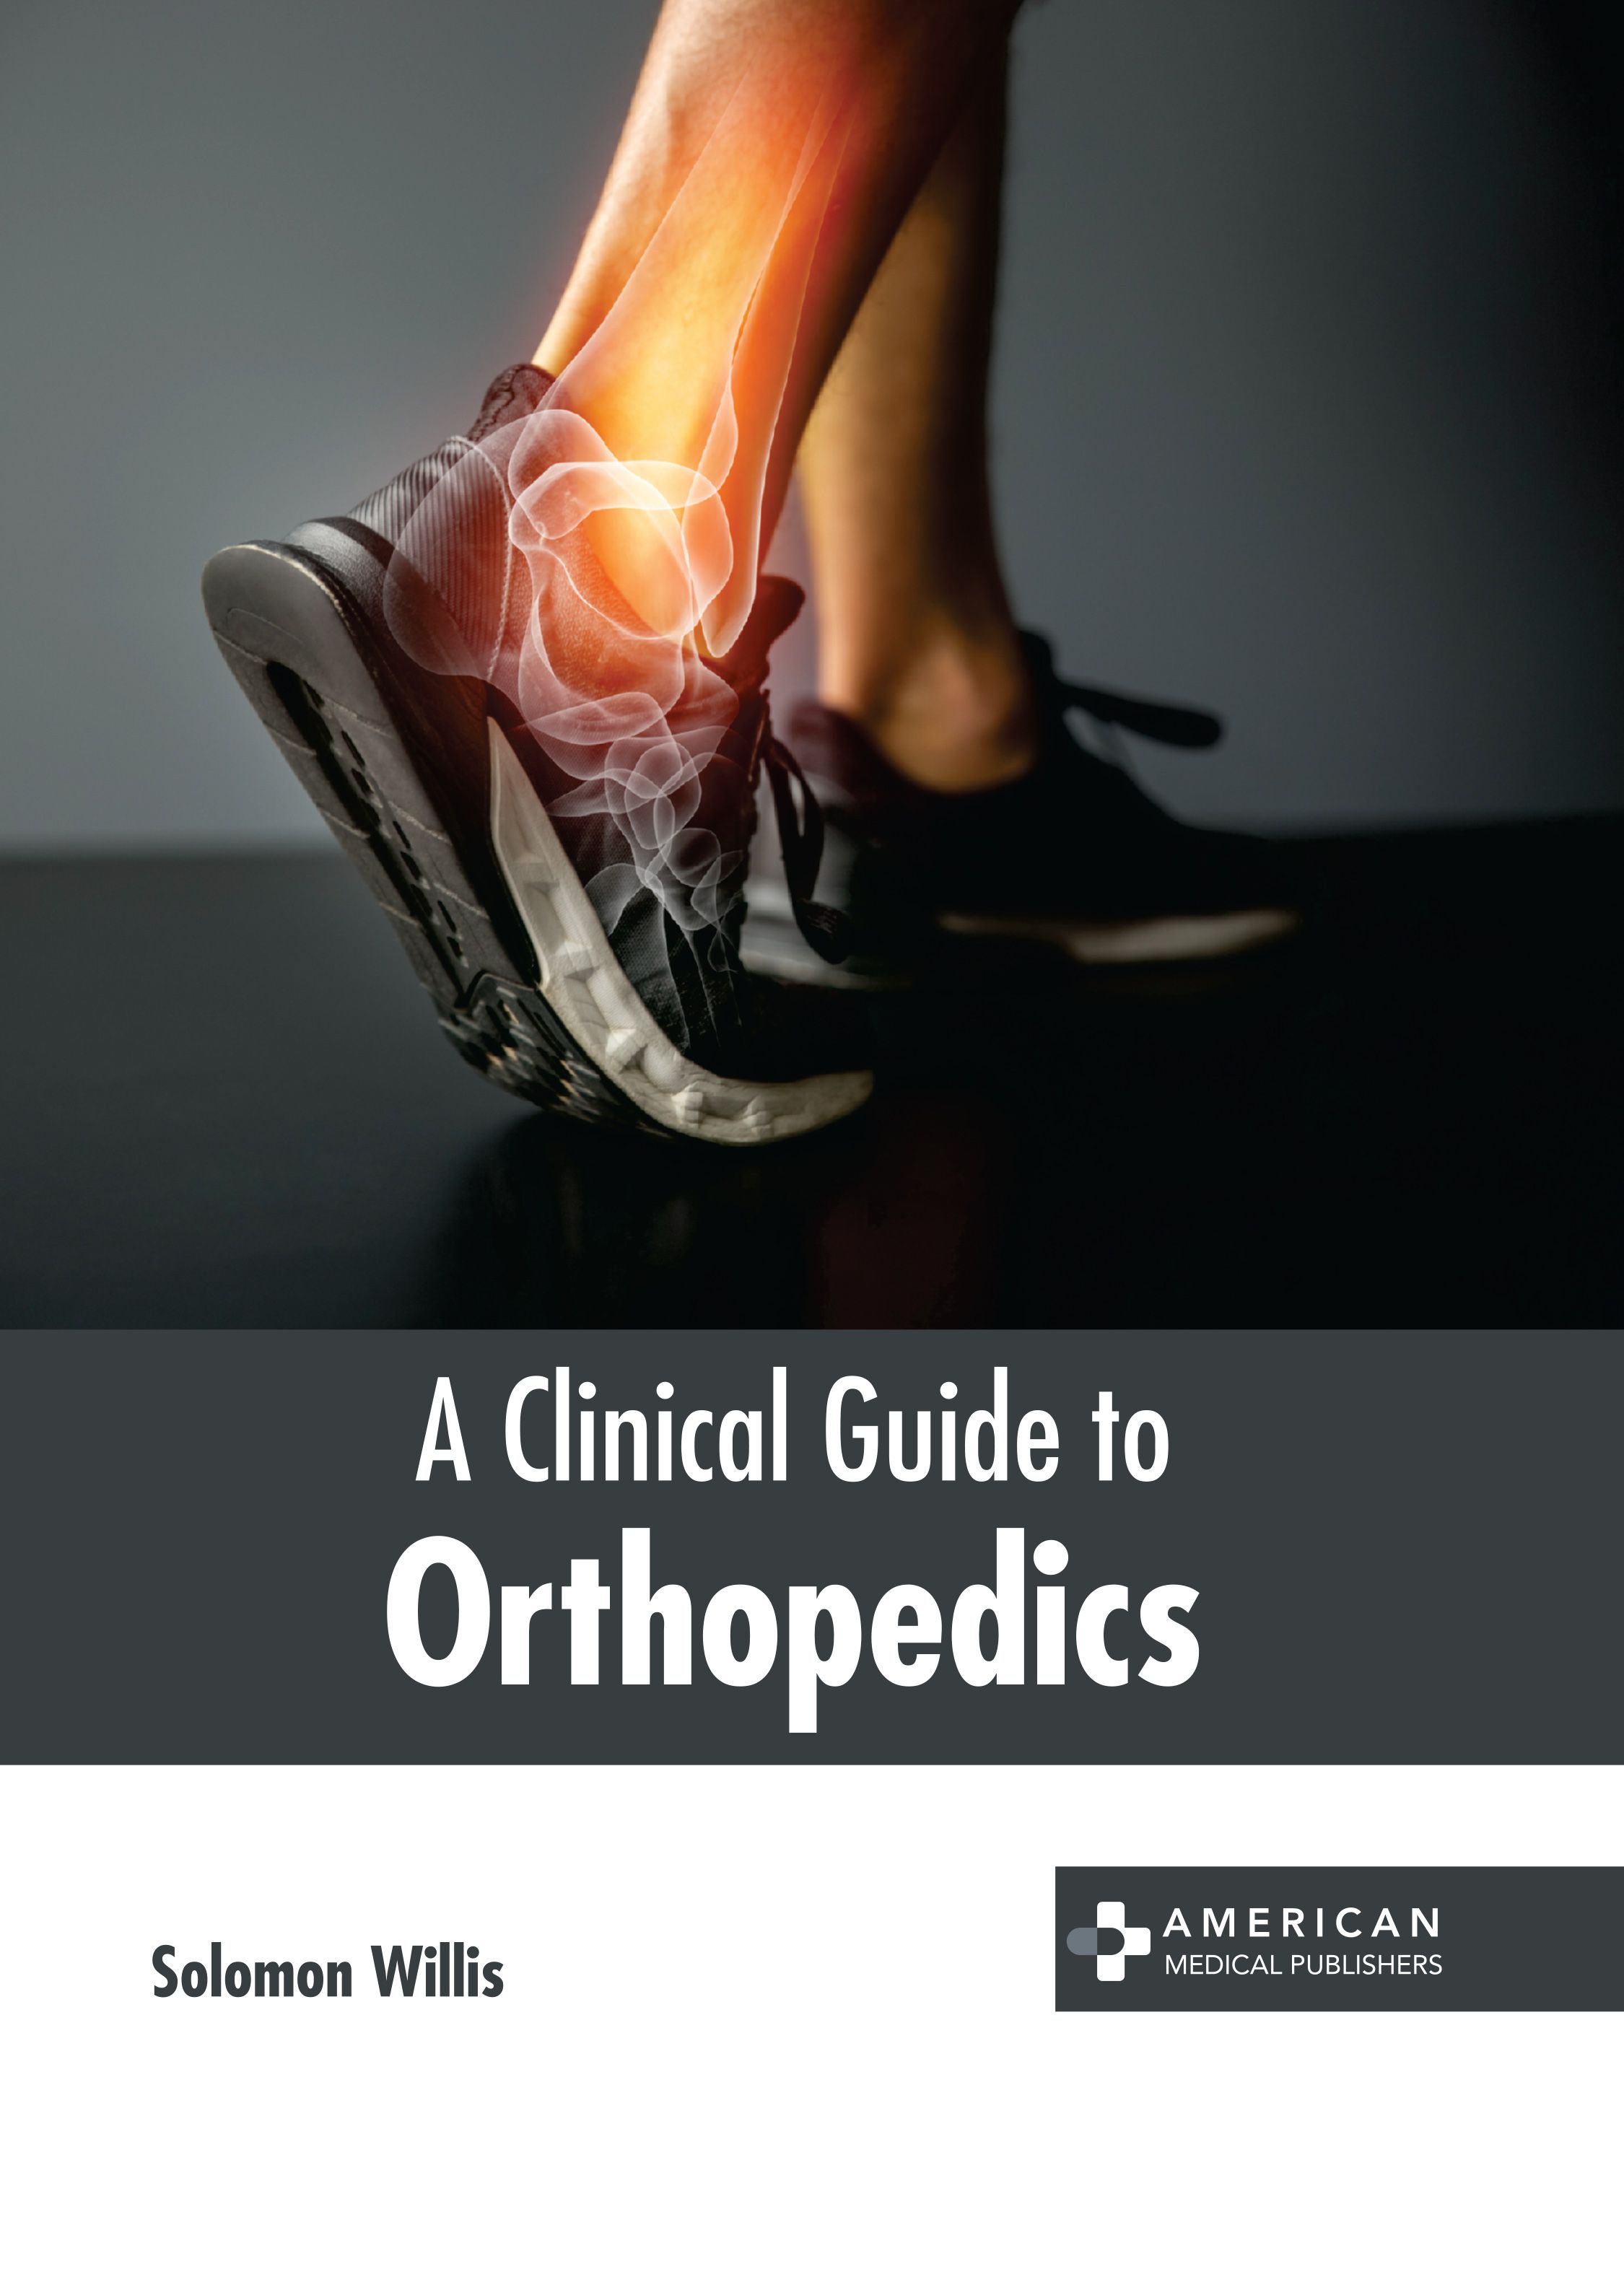 A CLINICAL GUIDE TO ORTHOPEDICS